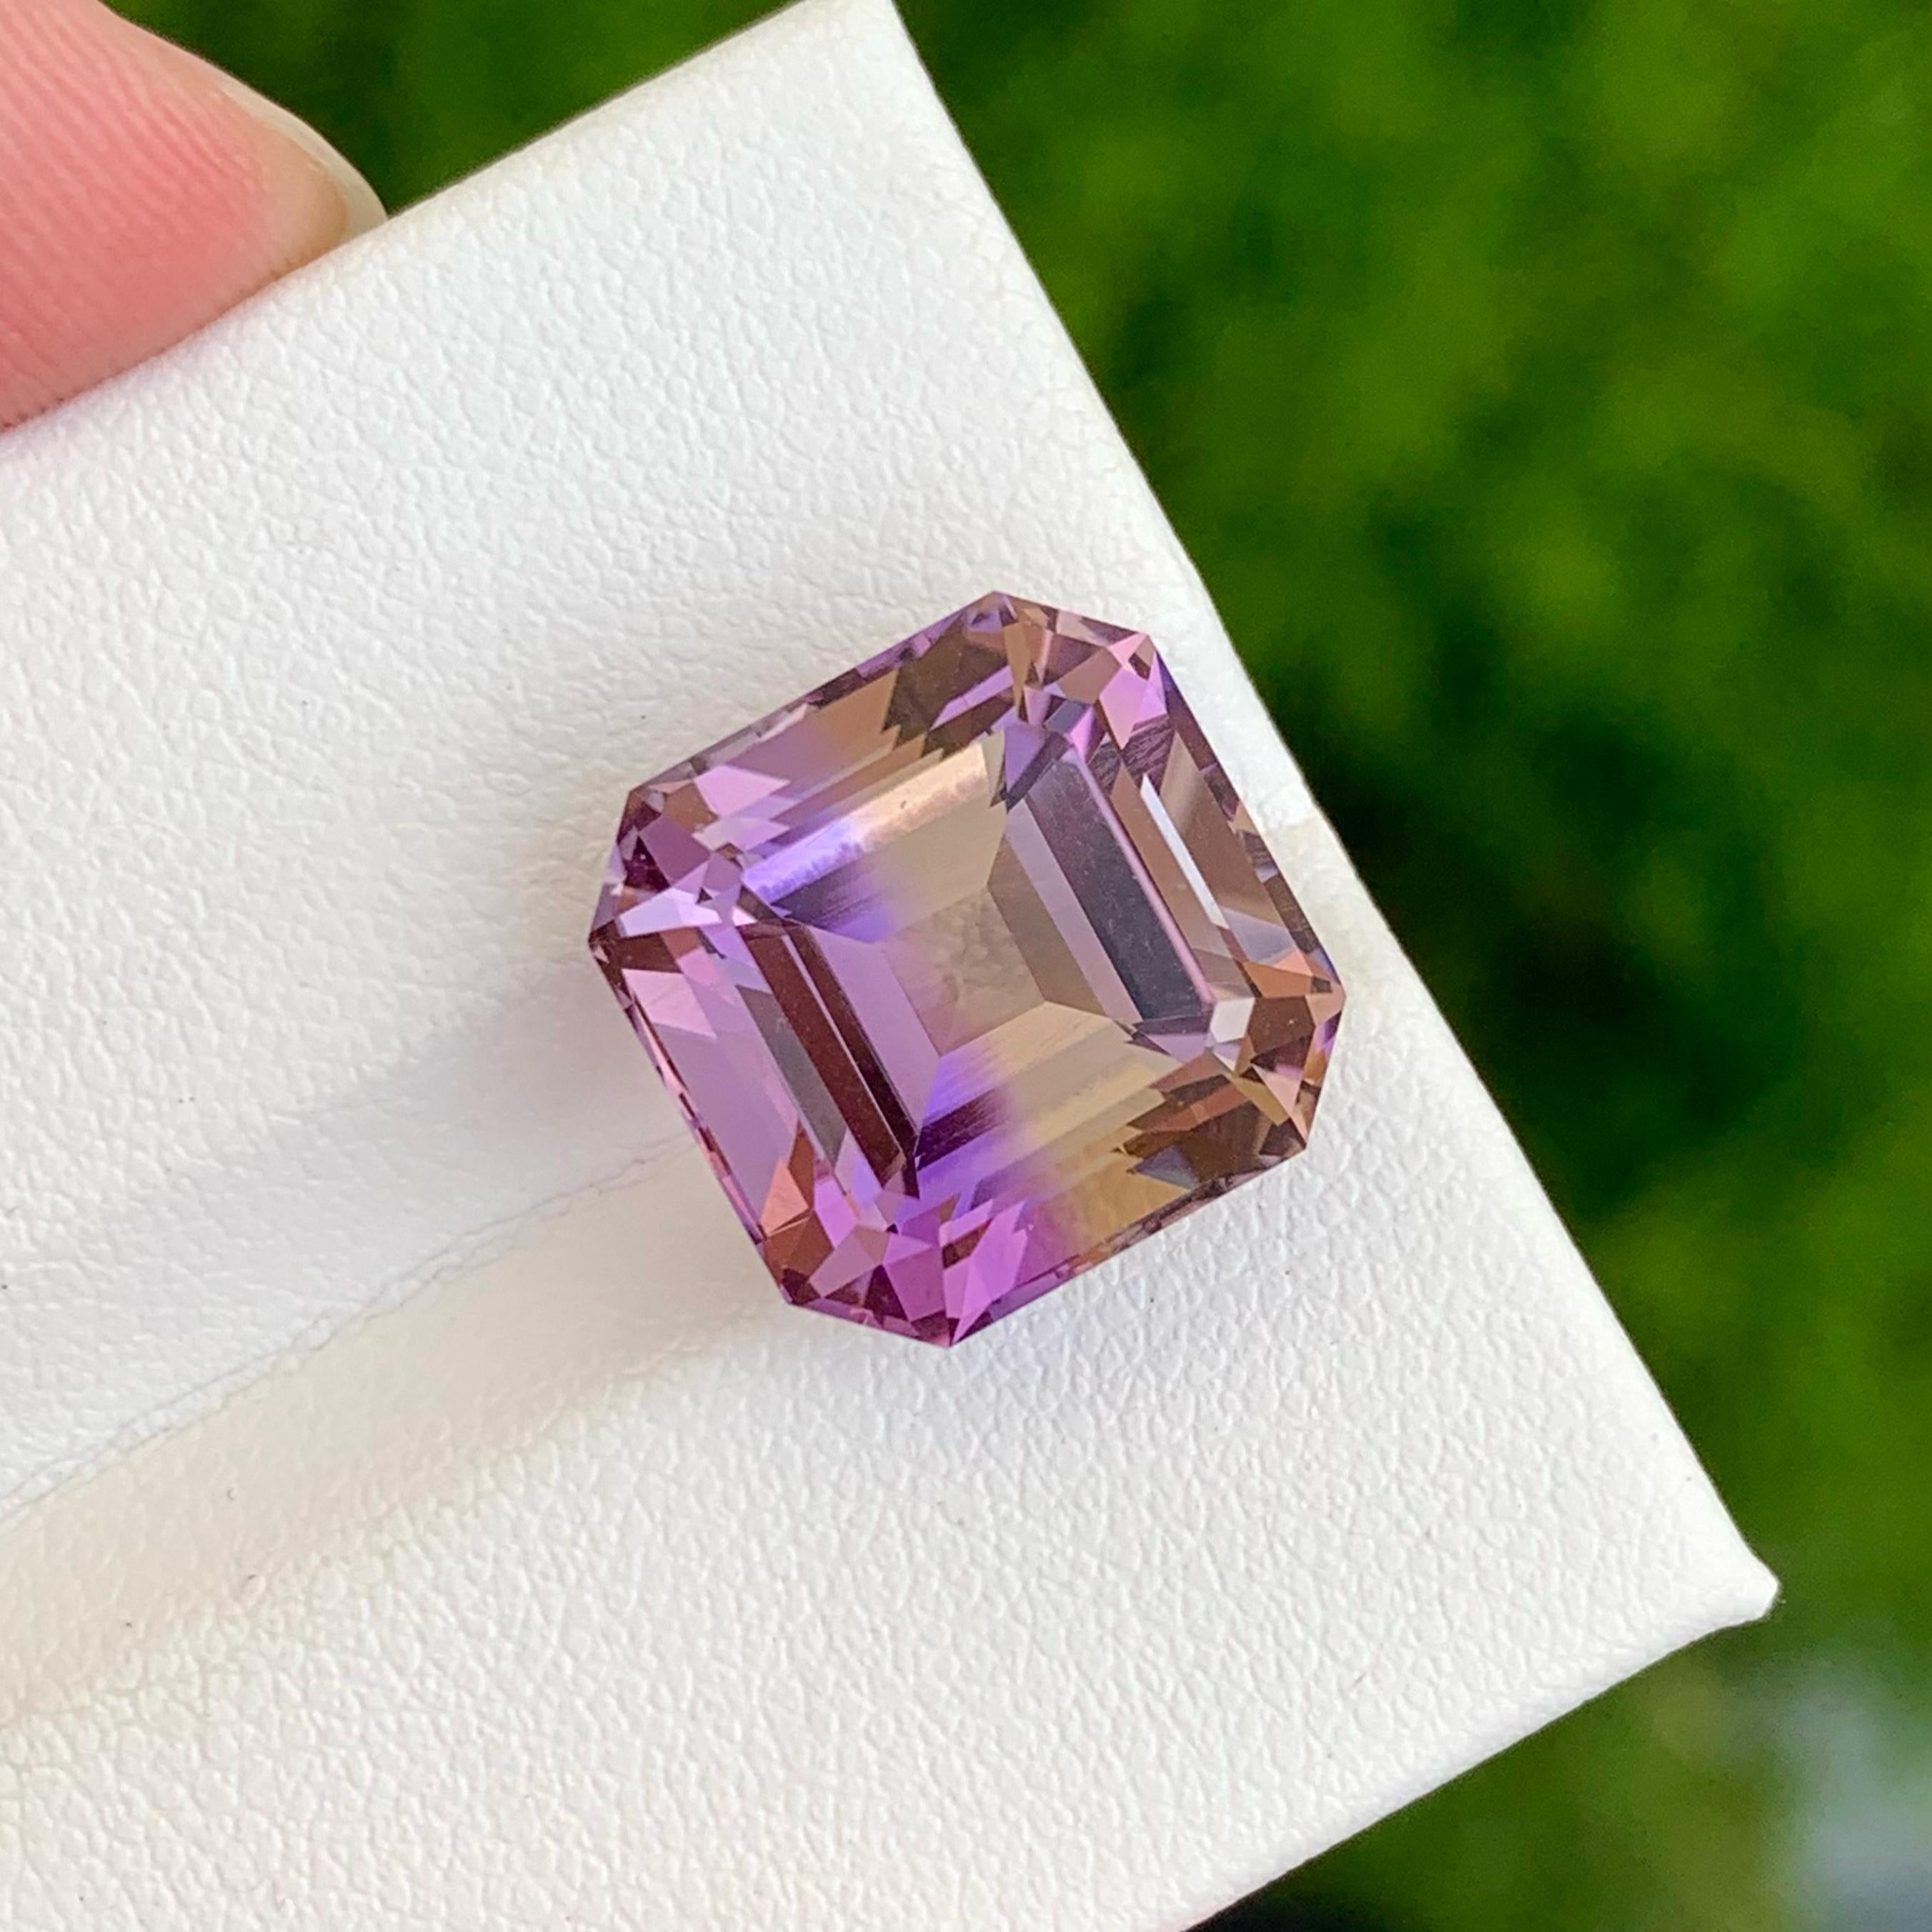 Weight 13.45 carats 
Dimensions 13.5x13.5x11.0 mm
Treatment none 
Origin Bolivia
Clarity loupe clean
Shape octagon 
Cut Asscher 

Ametrine's name perfectly reflects its dual nature, combining amethyst and citrine. The gemstone features distinct